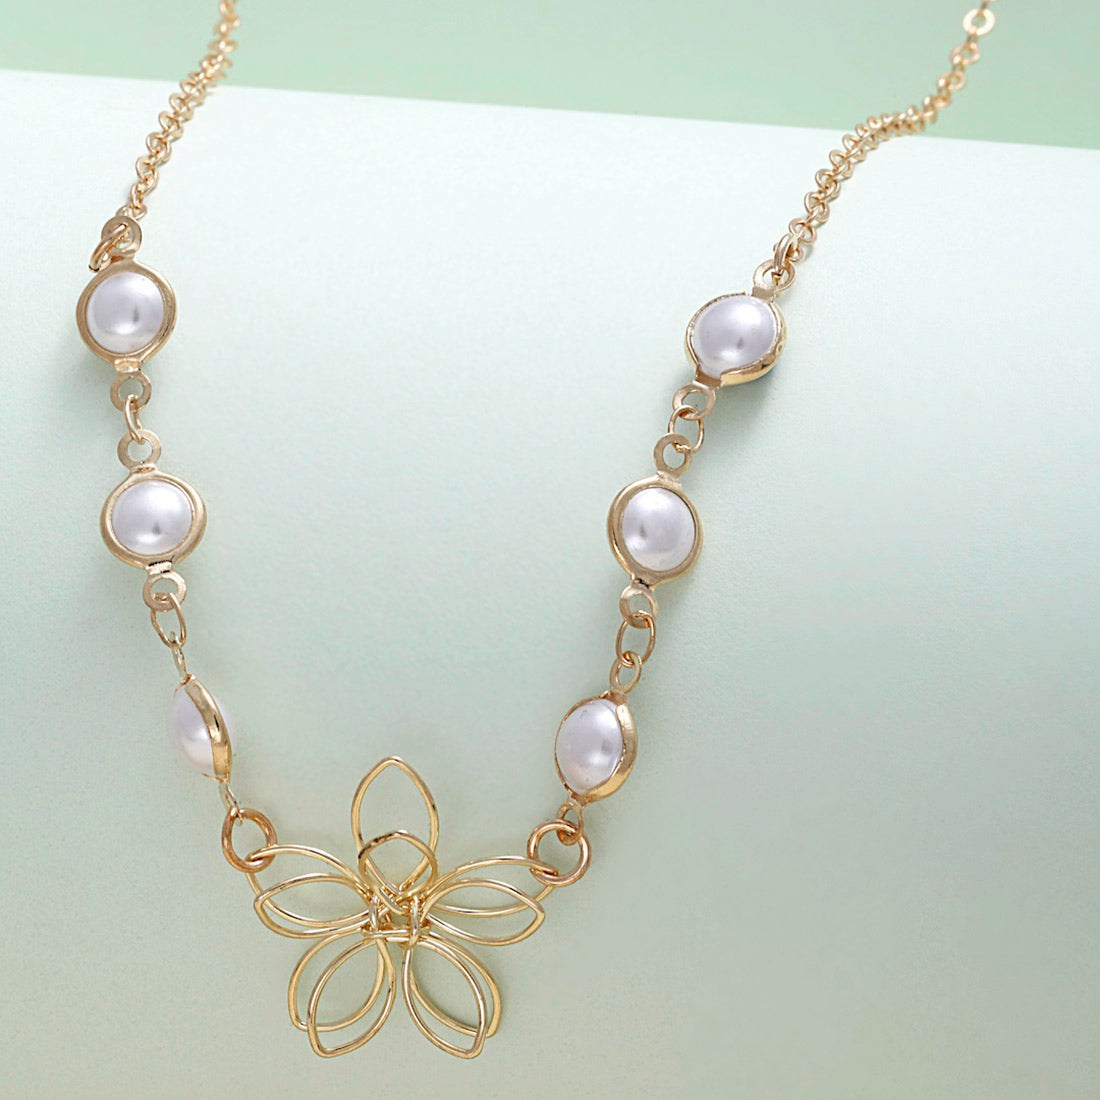 Florid Pearl Necklace